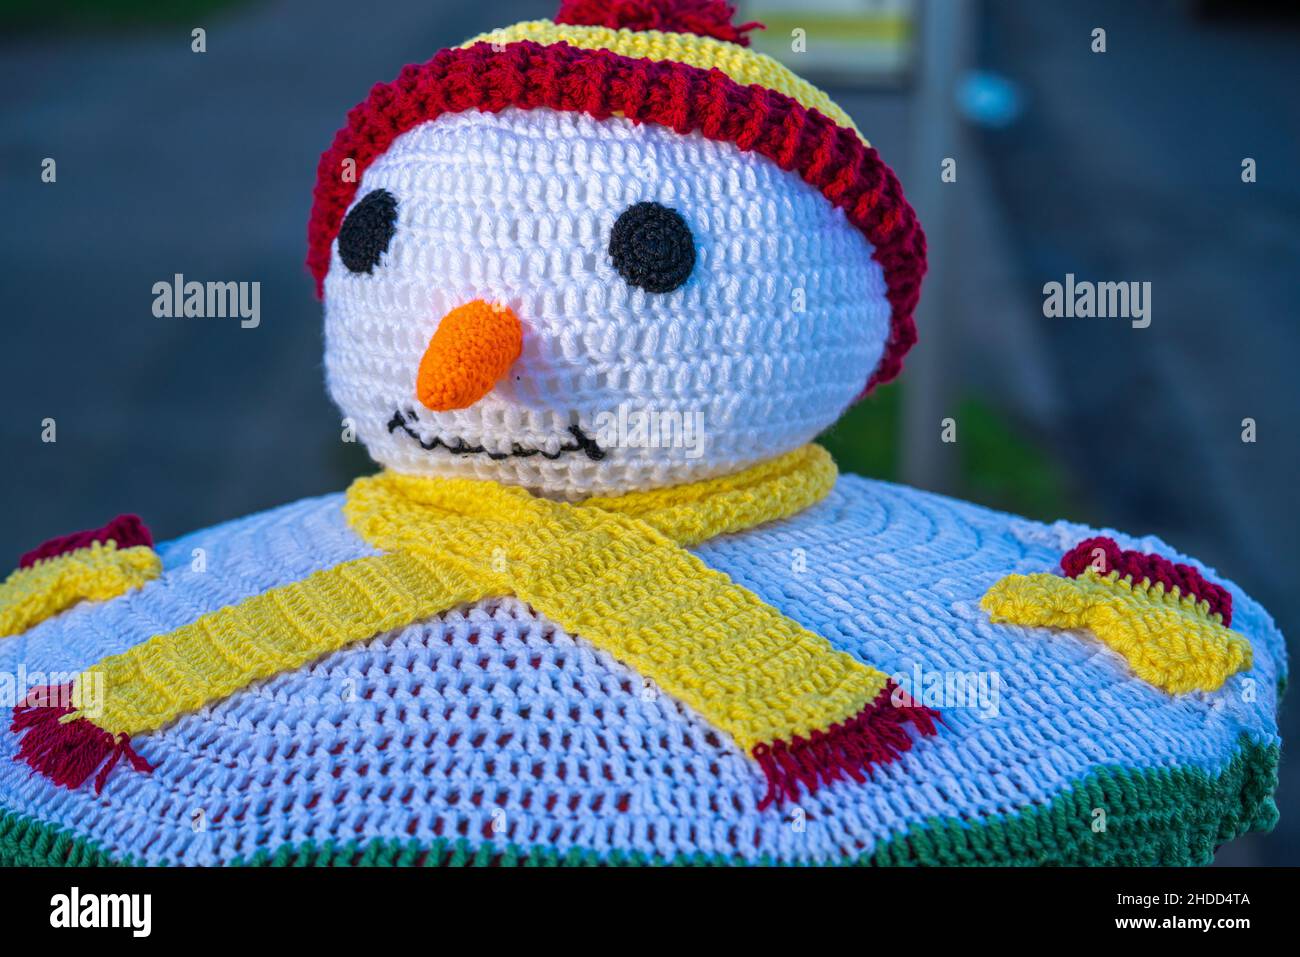 Red, postbox, post box, crocheted, Royal Mail, woolly hats, hand-knitted, pillar boxes, Lincoln City, bobble hat and scarf, The Snow Snowman, Xmas. Stock Photo